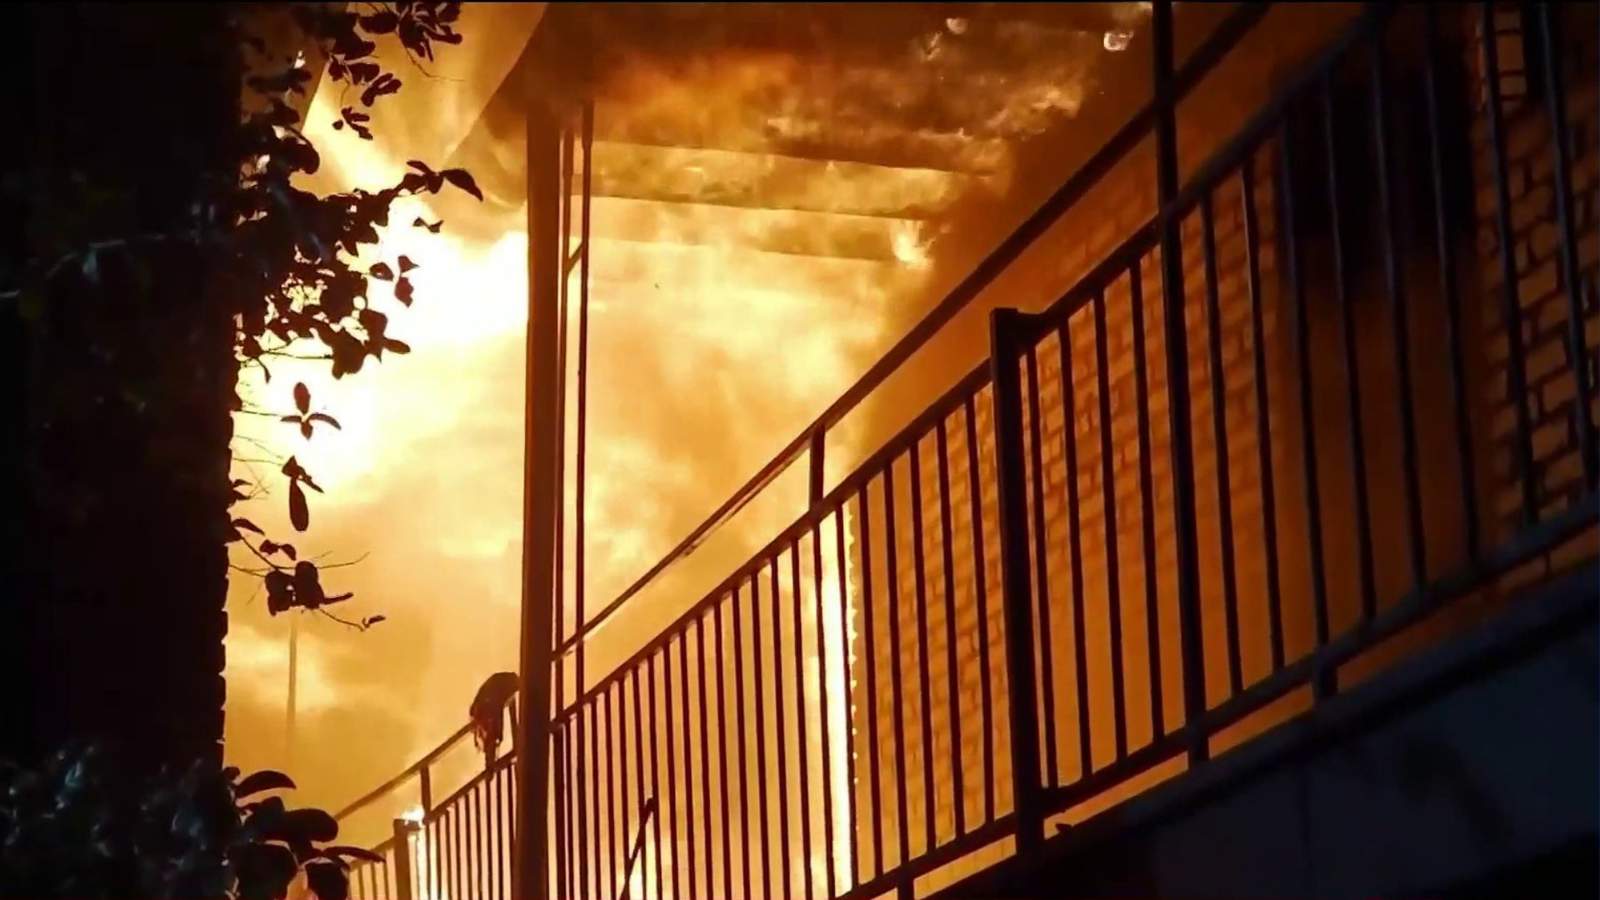 2 firefighters fall from second floor while crews battle apartment fire